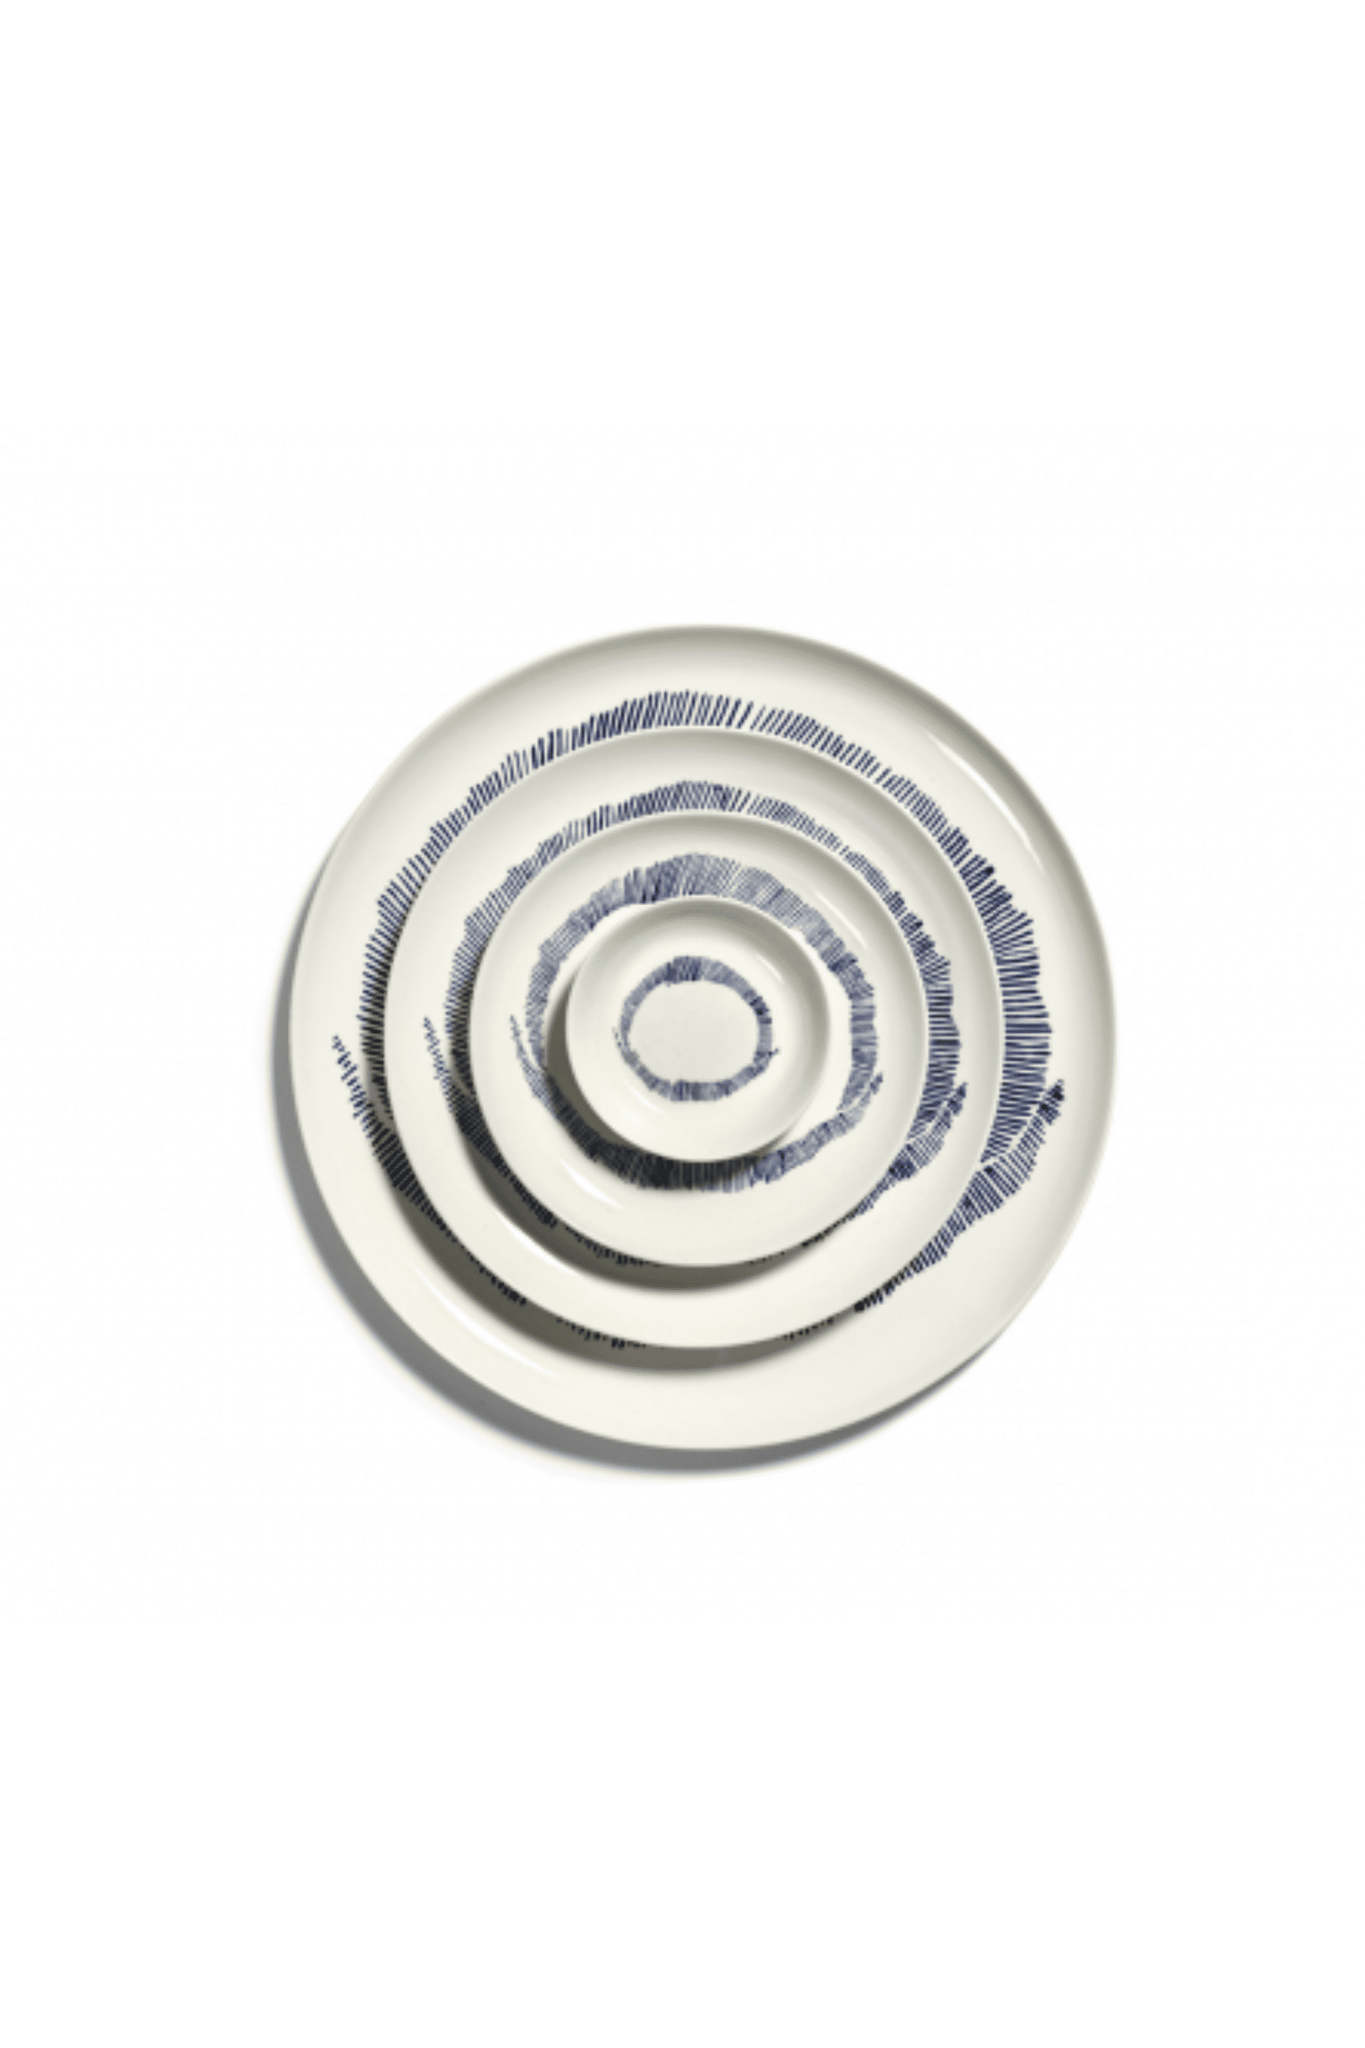 Set of 2 Small Plates, White Swirl with Blue Stripes Ottolenghi Serax, top view stacked with various plate sizes